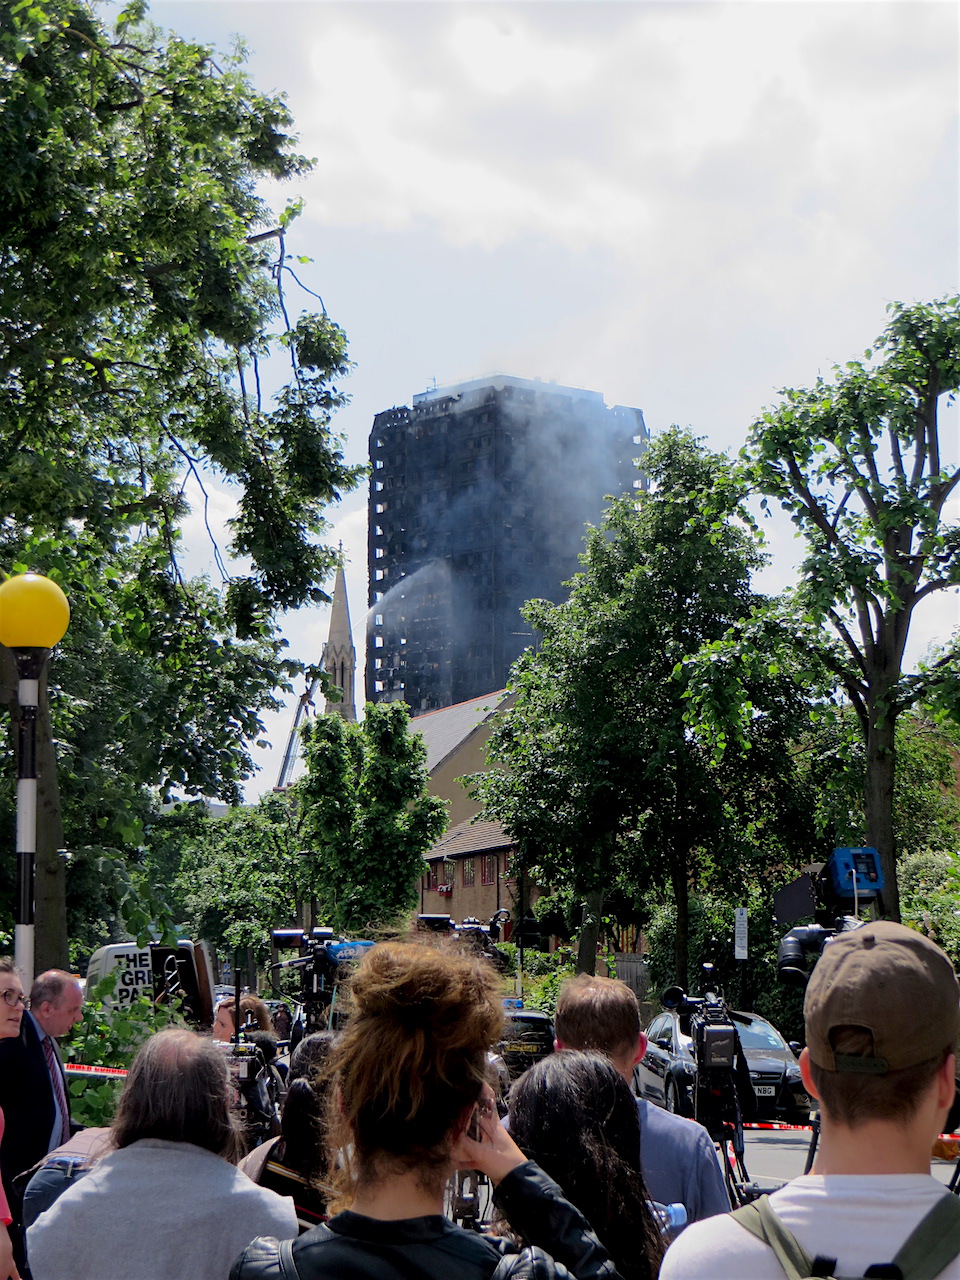 Grenfell Tower, photographed on the afternoon of June 14, 2017, about 12 hours after the inferno began (Photo: Andy Worthington).